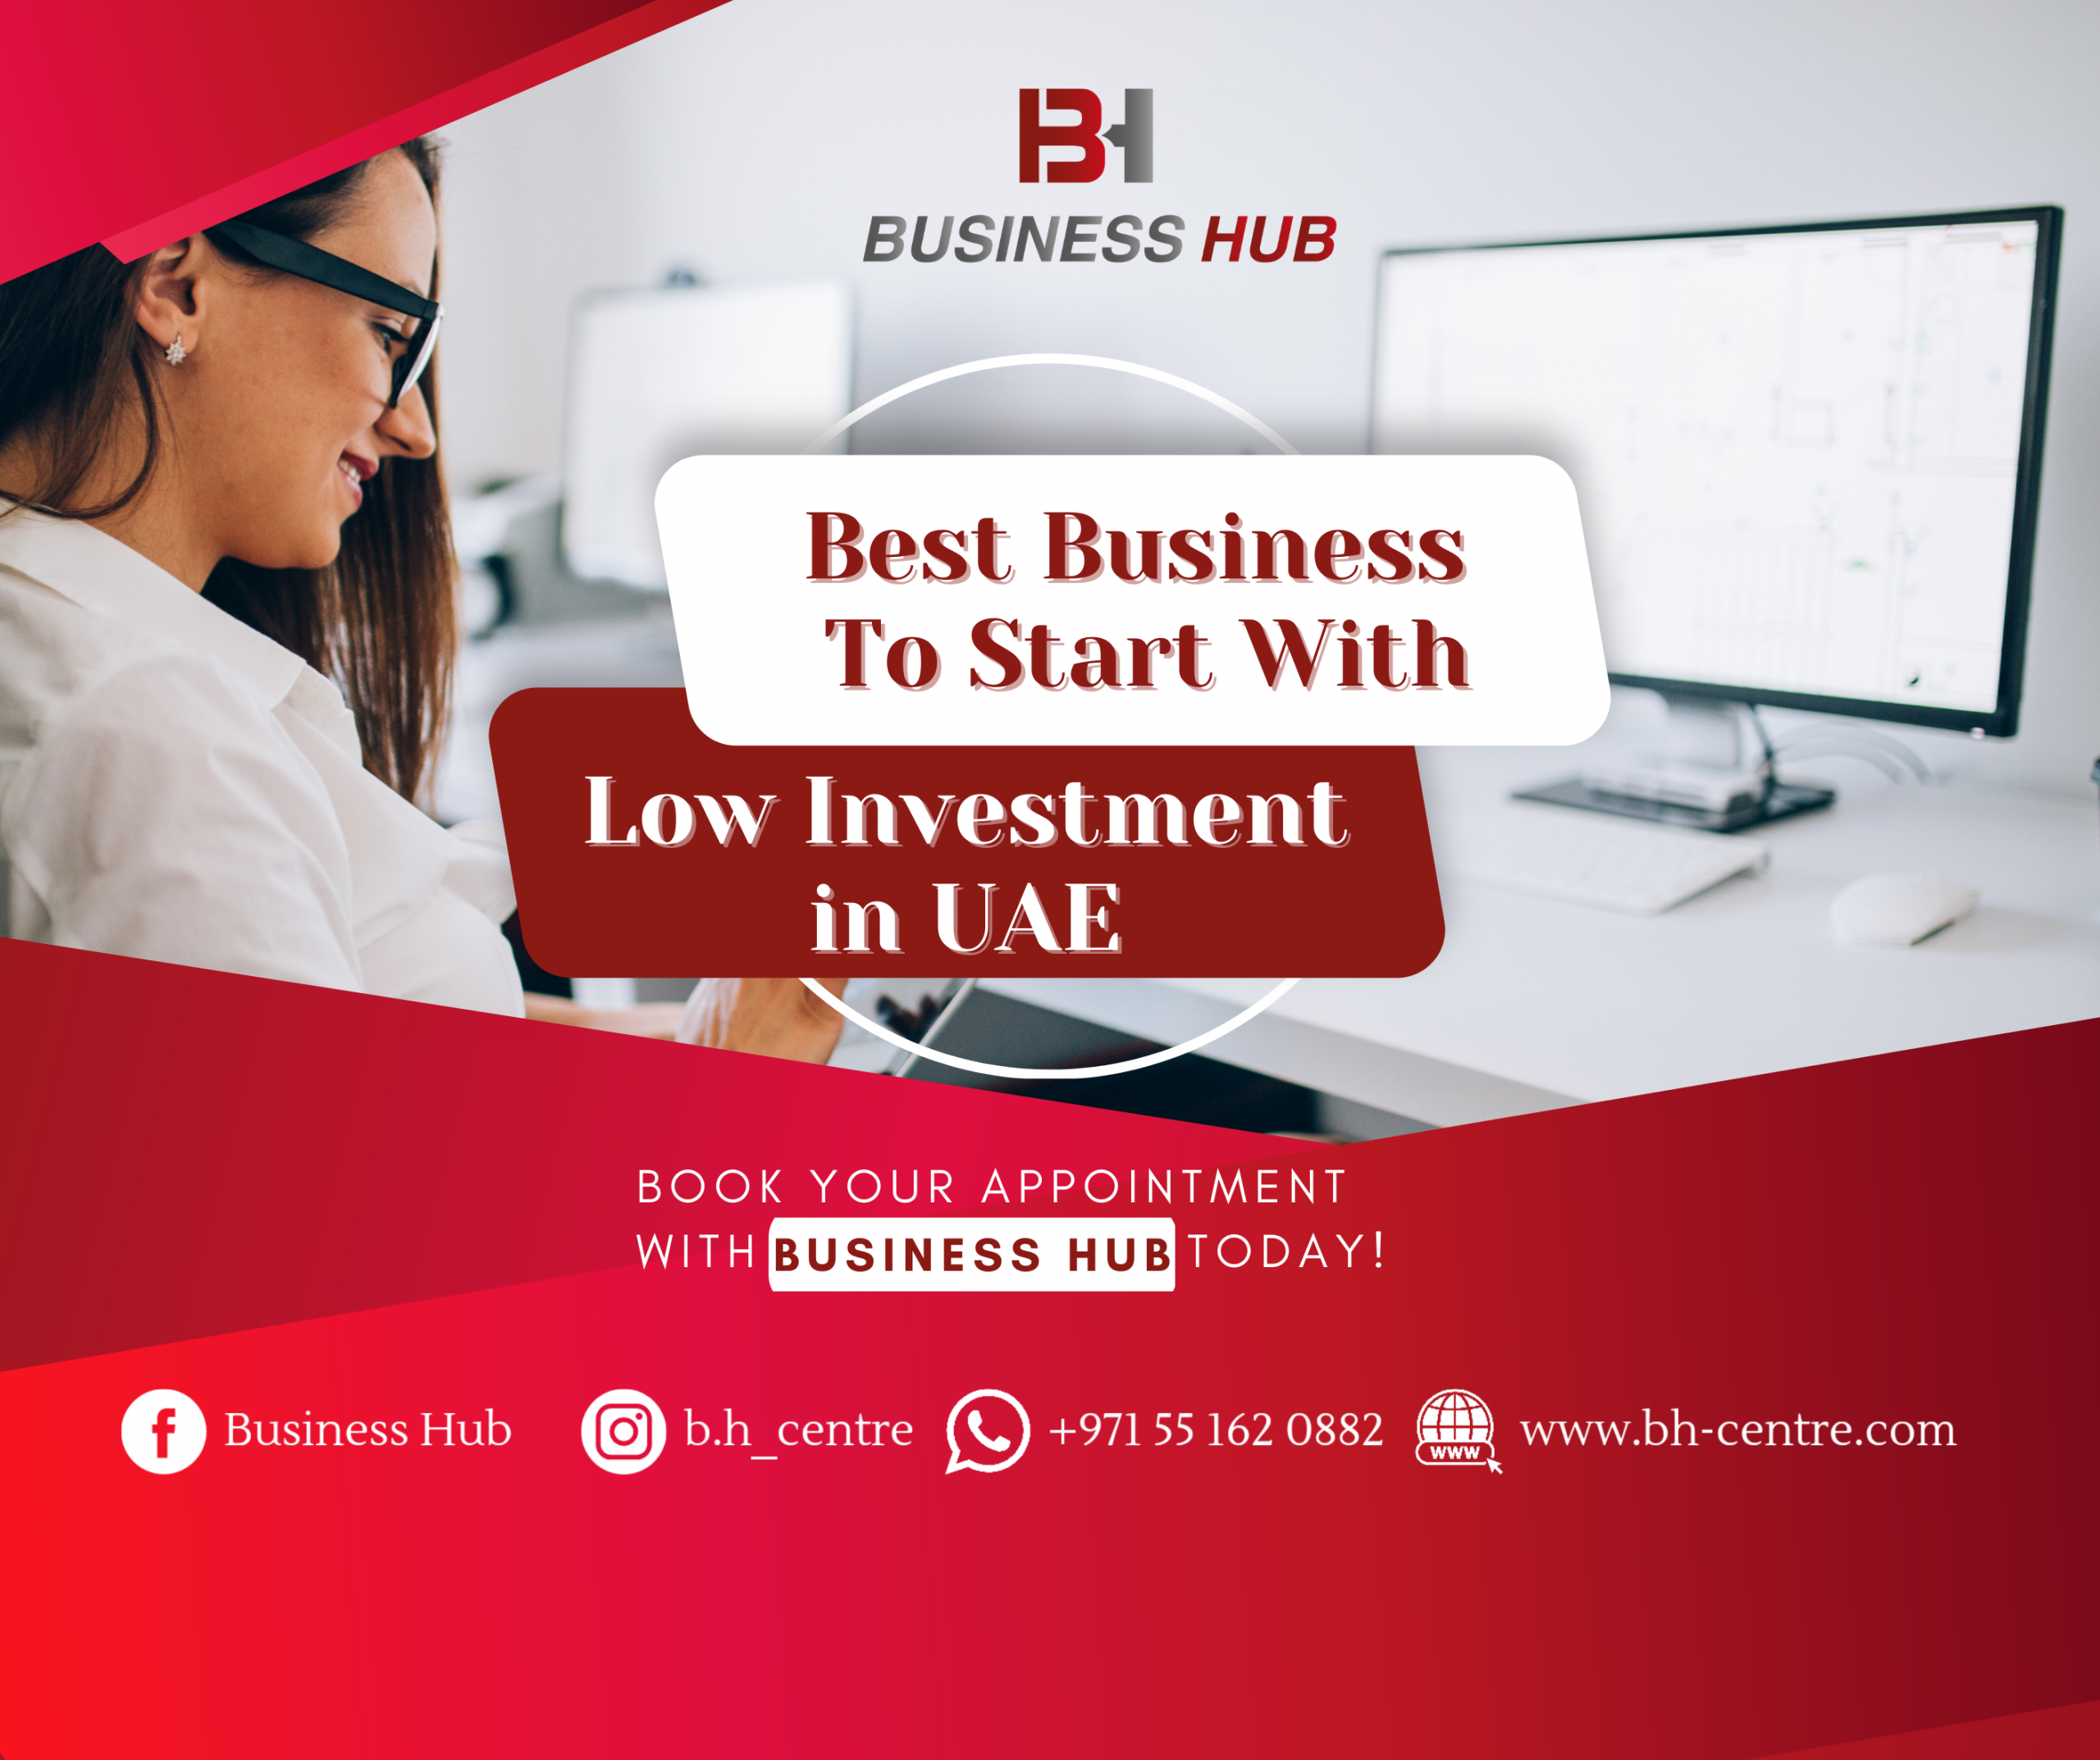 Business Set-Up Consultancy In Dubai Helps You Get Your Investors' Emirates ID